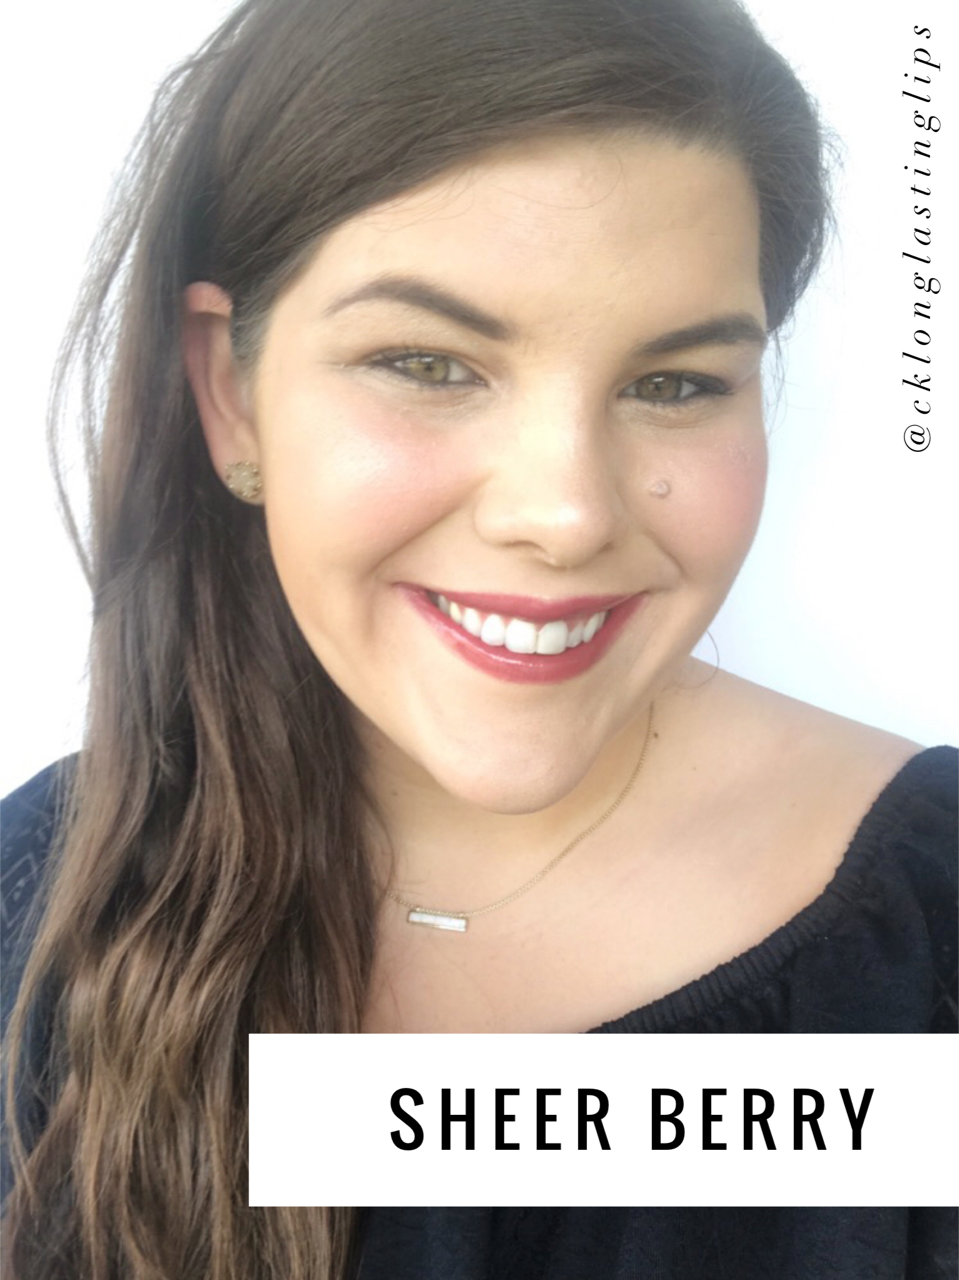  Sheer Berry &nbsp;LipSense - I love this long lasting lipstick. Water-proof, smudge proof &amp; kiss proof www.carleykelley.com 